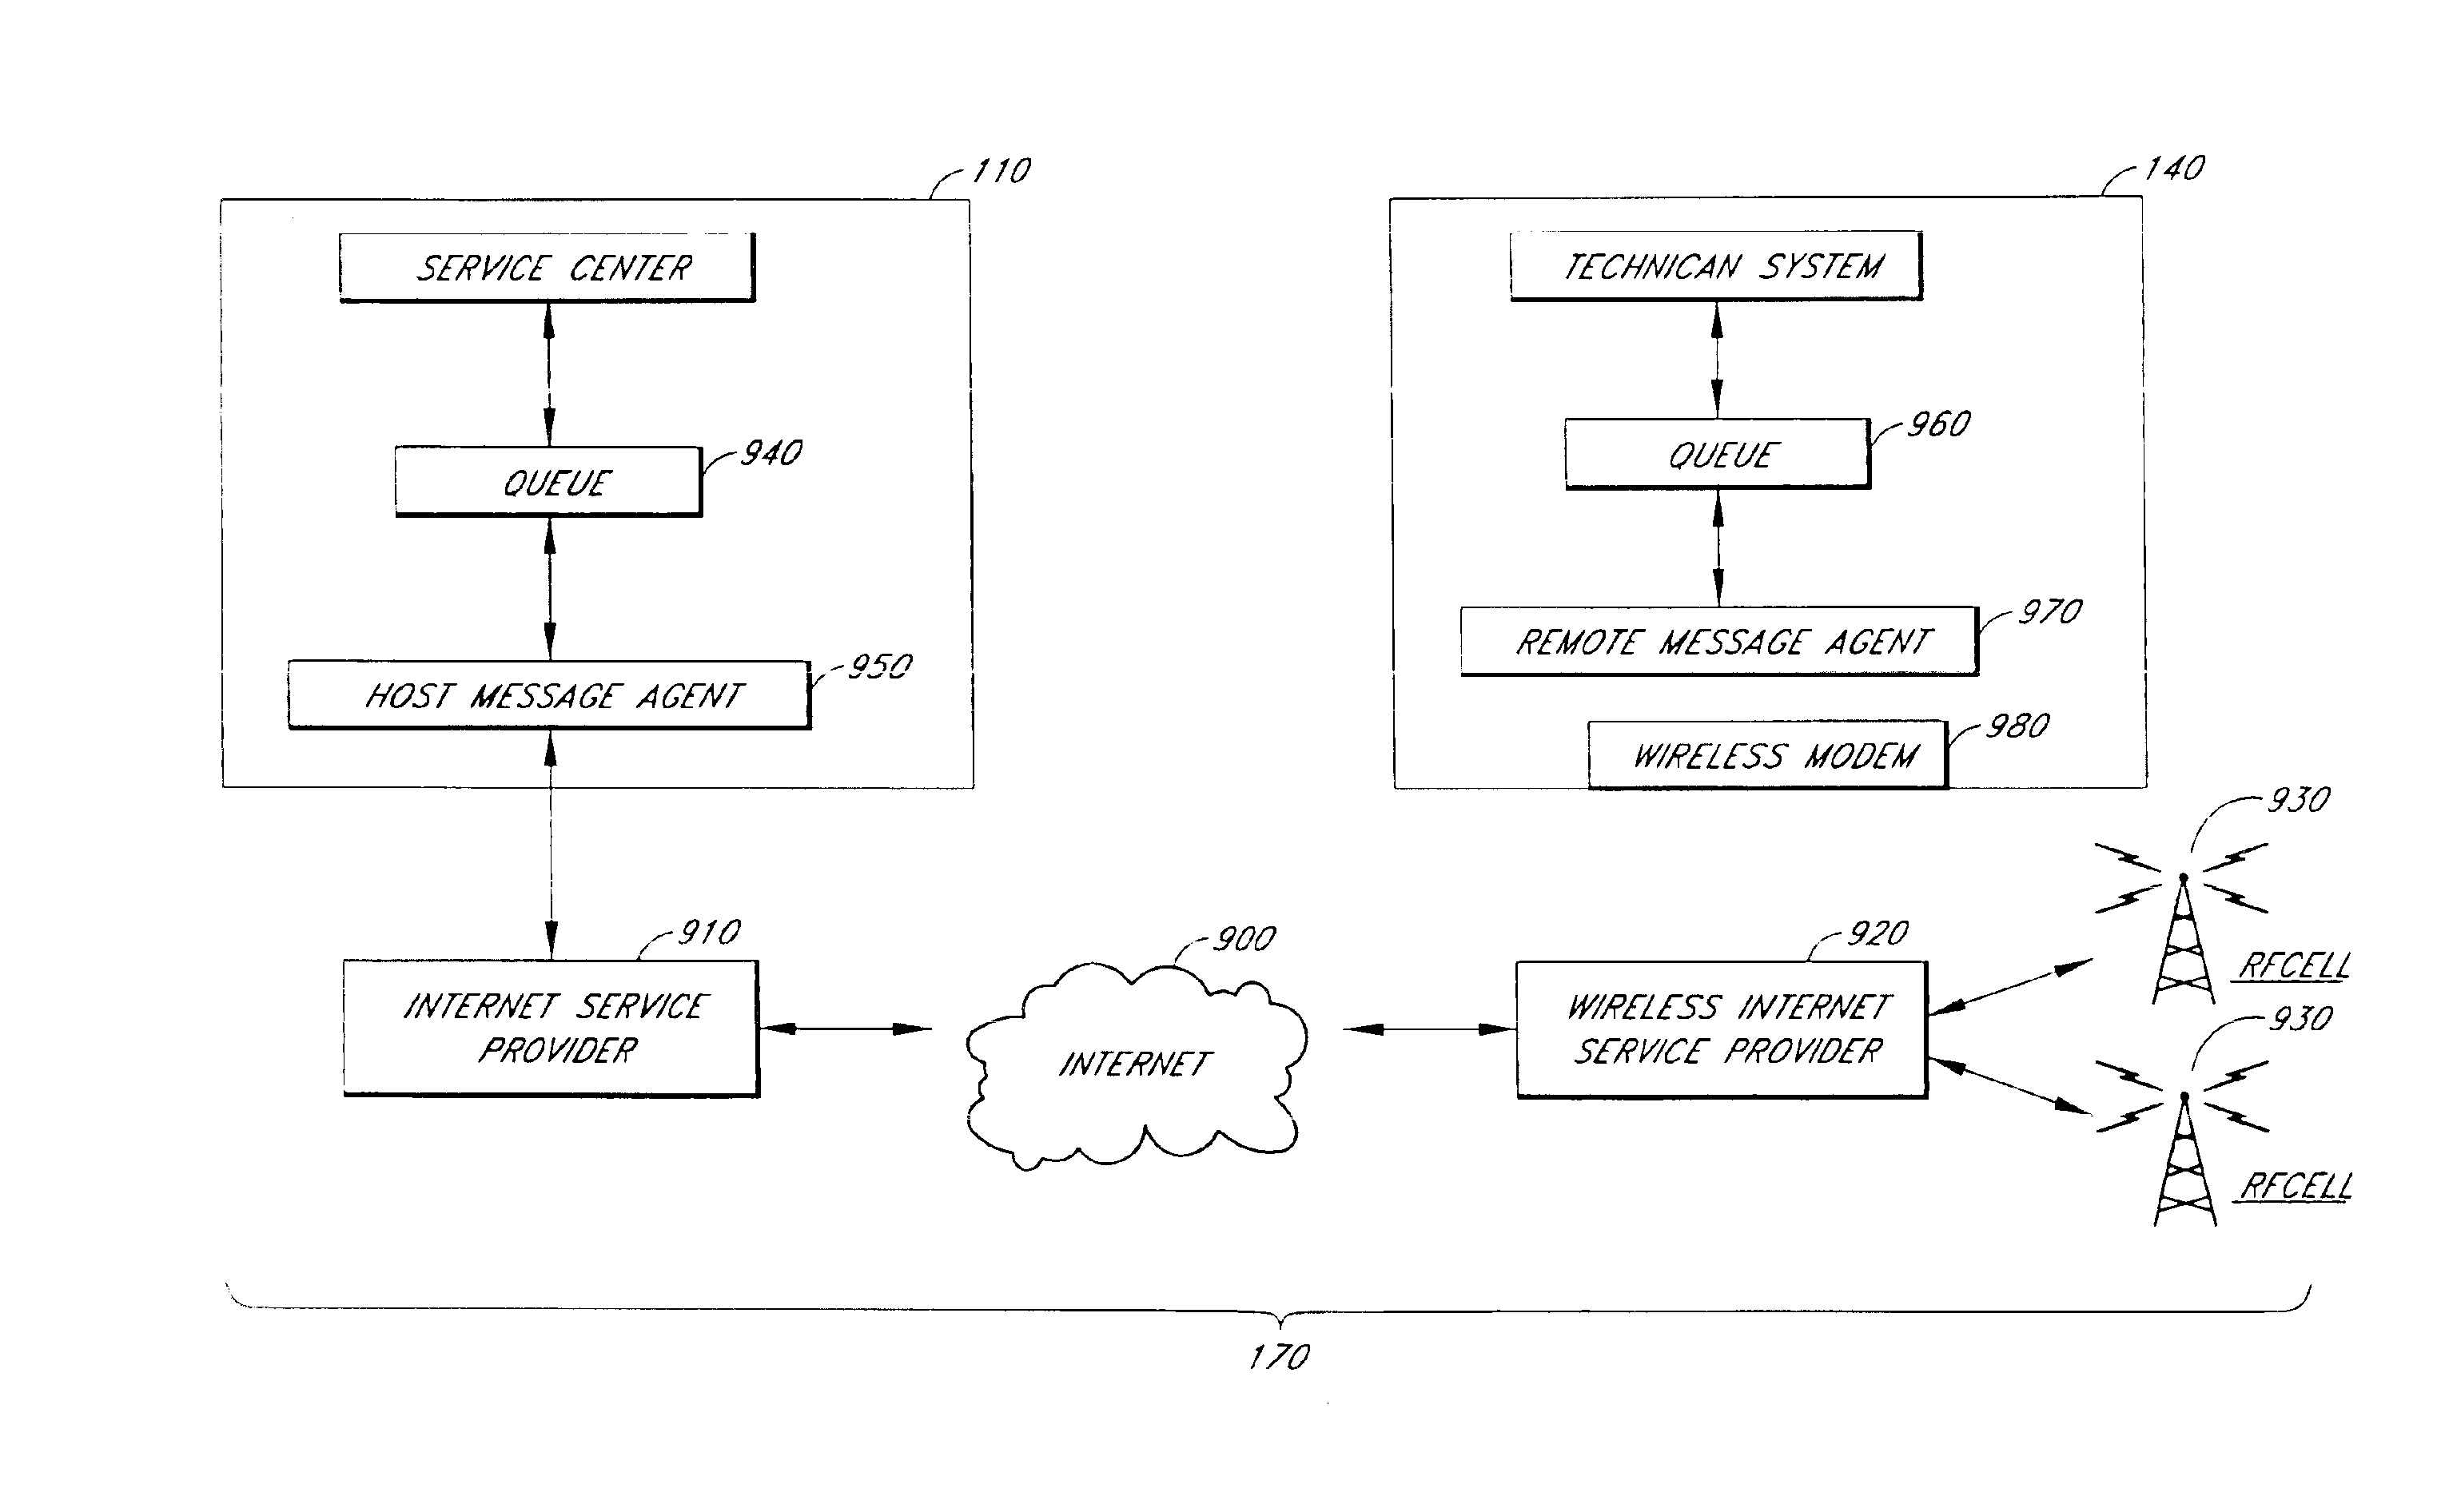 Method and systems for wireless communication for a field service system